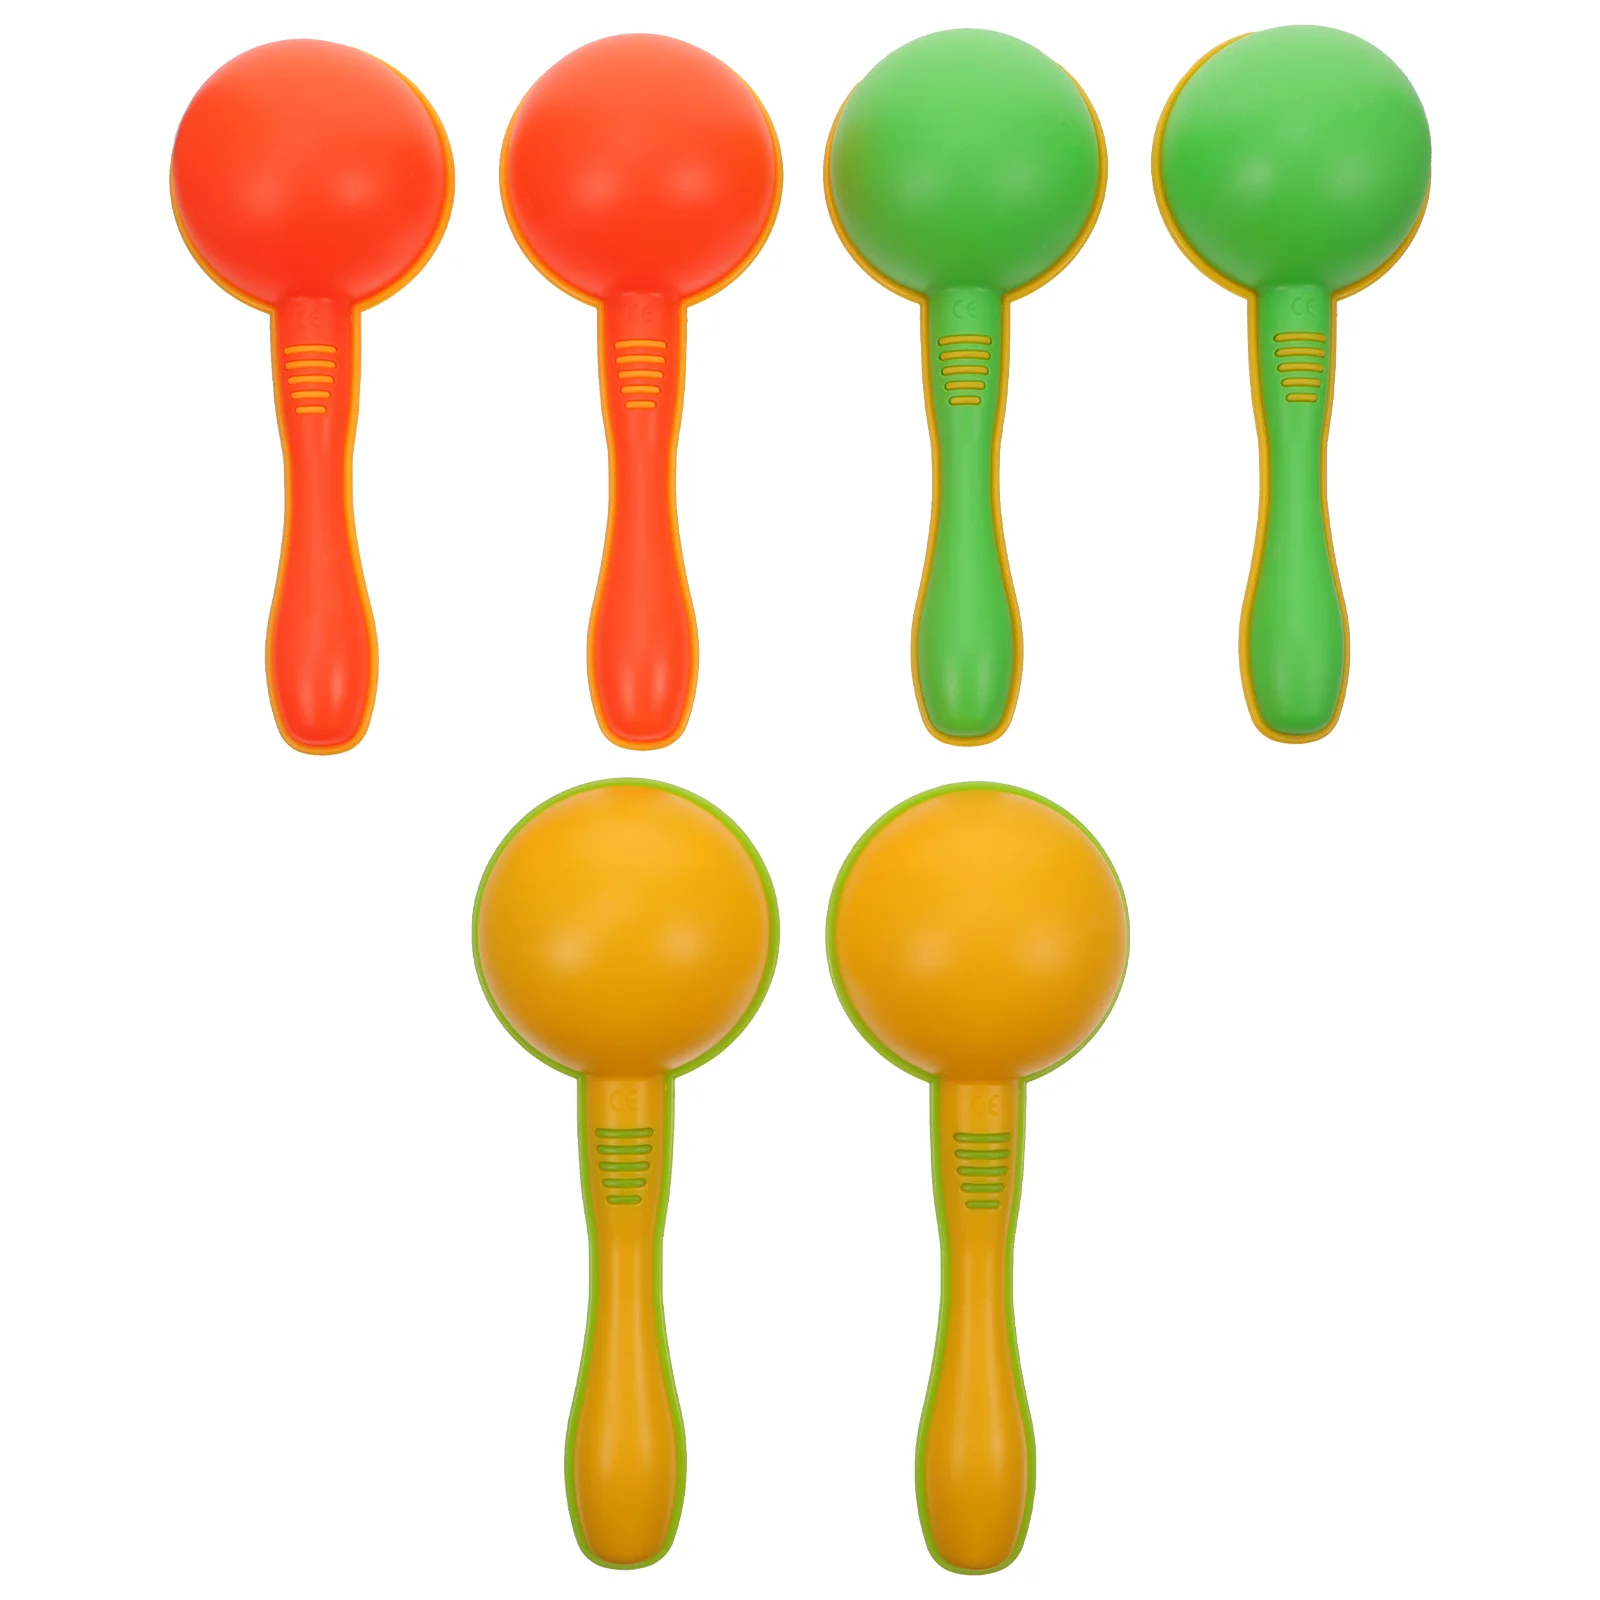 

6 Pcs Musical Instruments Orff Exquisite Percussion Creative Sand Hammers Teaching Aids Musical Instrumentss for Kids Plastic